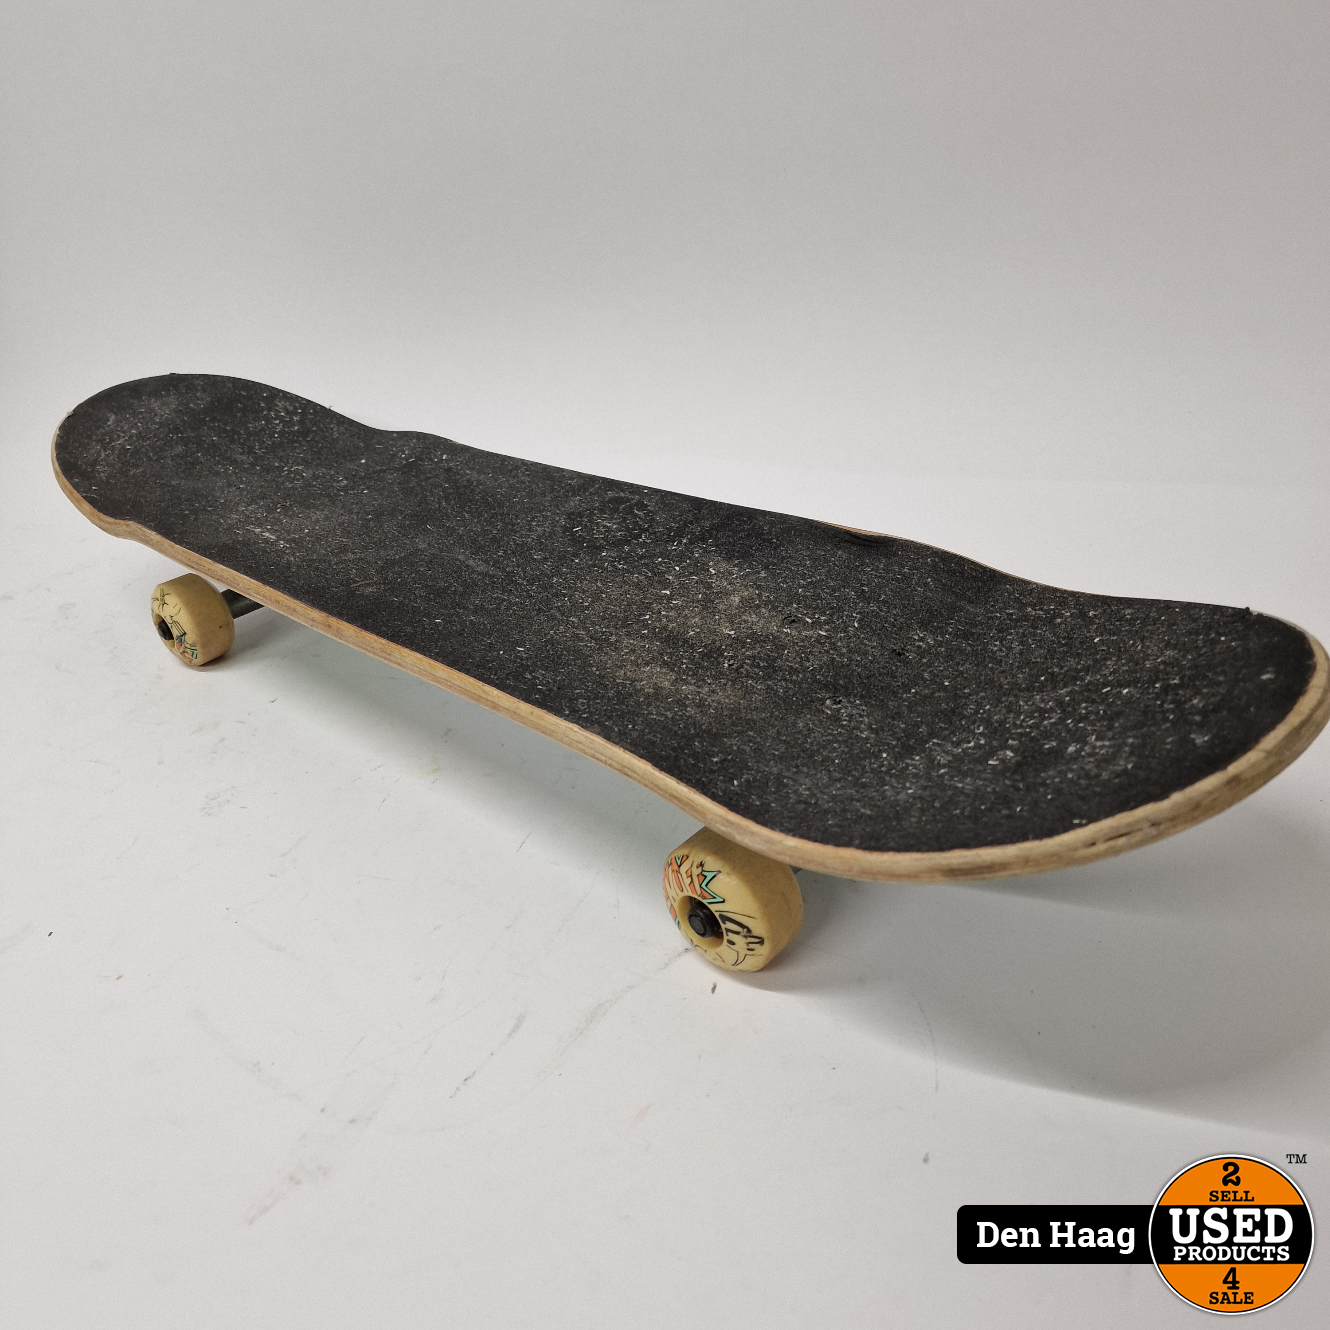 Uitstralen rand Mompelen Enuff POW Compleet Skateboard - Used Products Den Haag